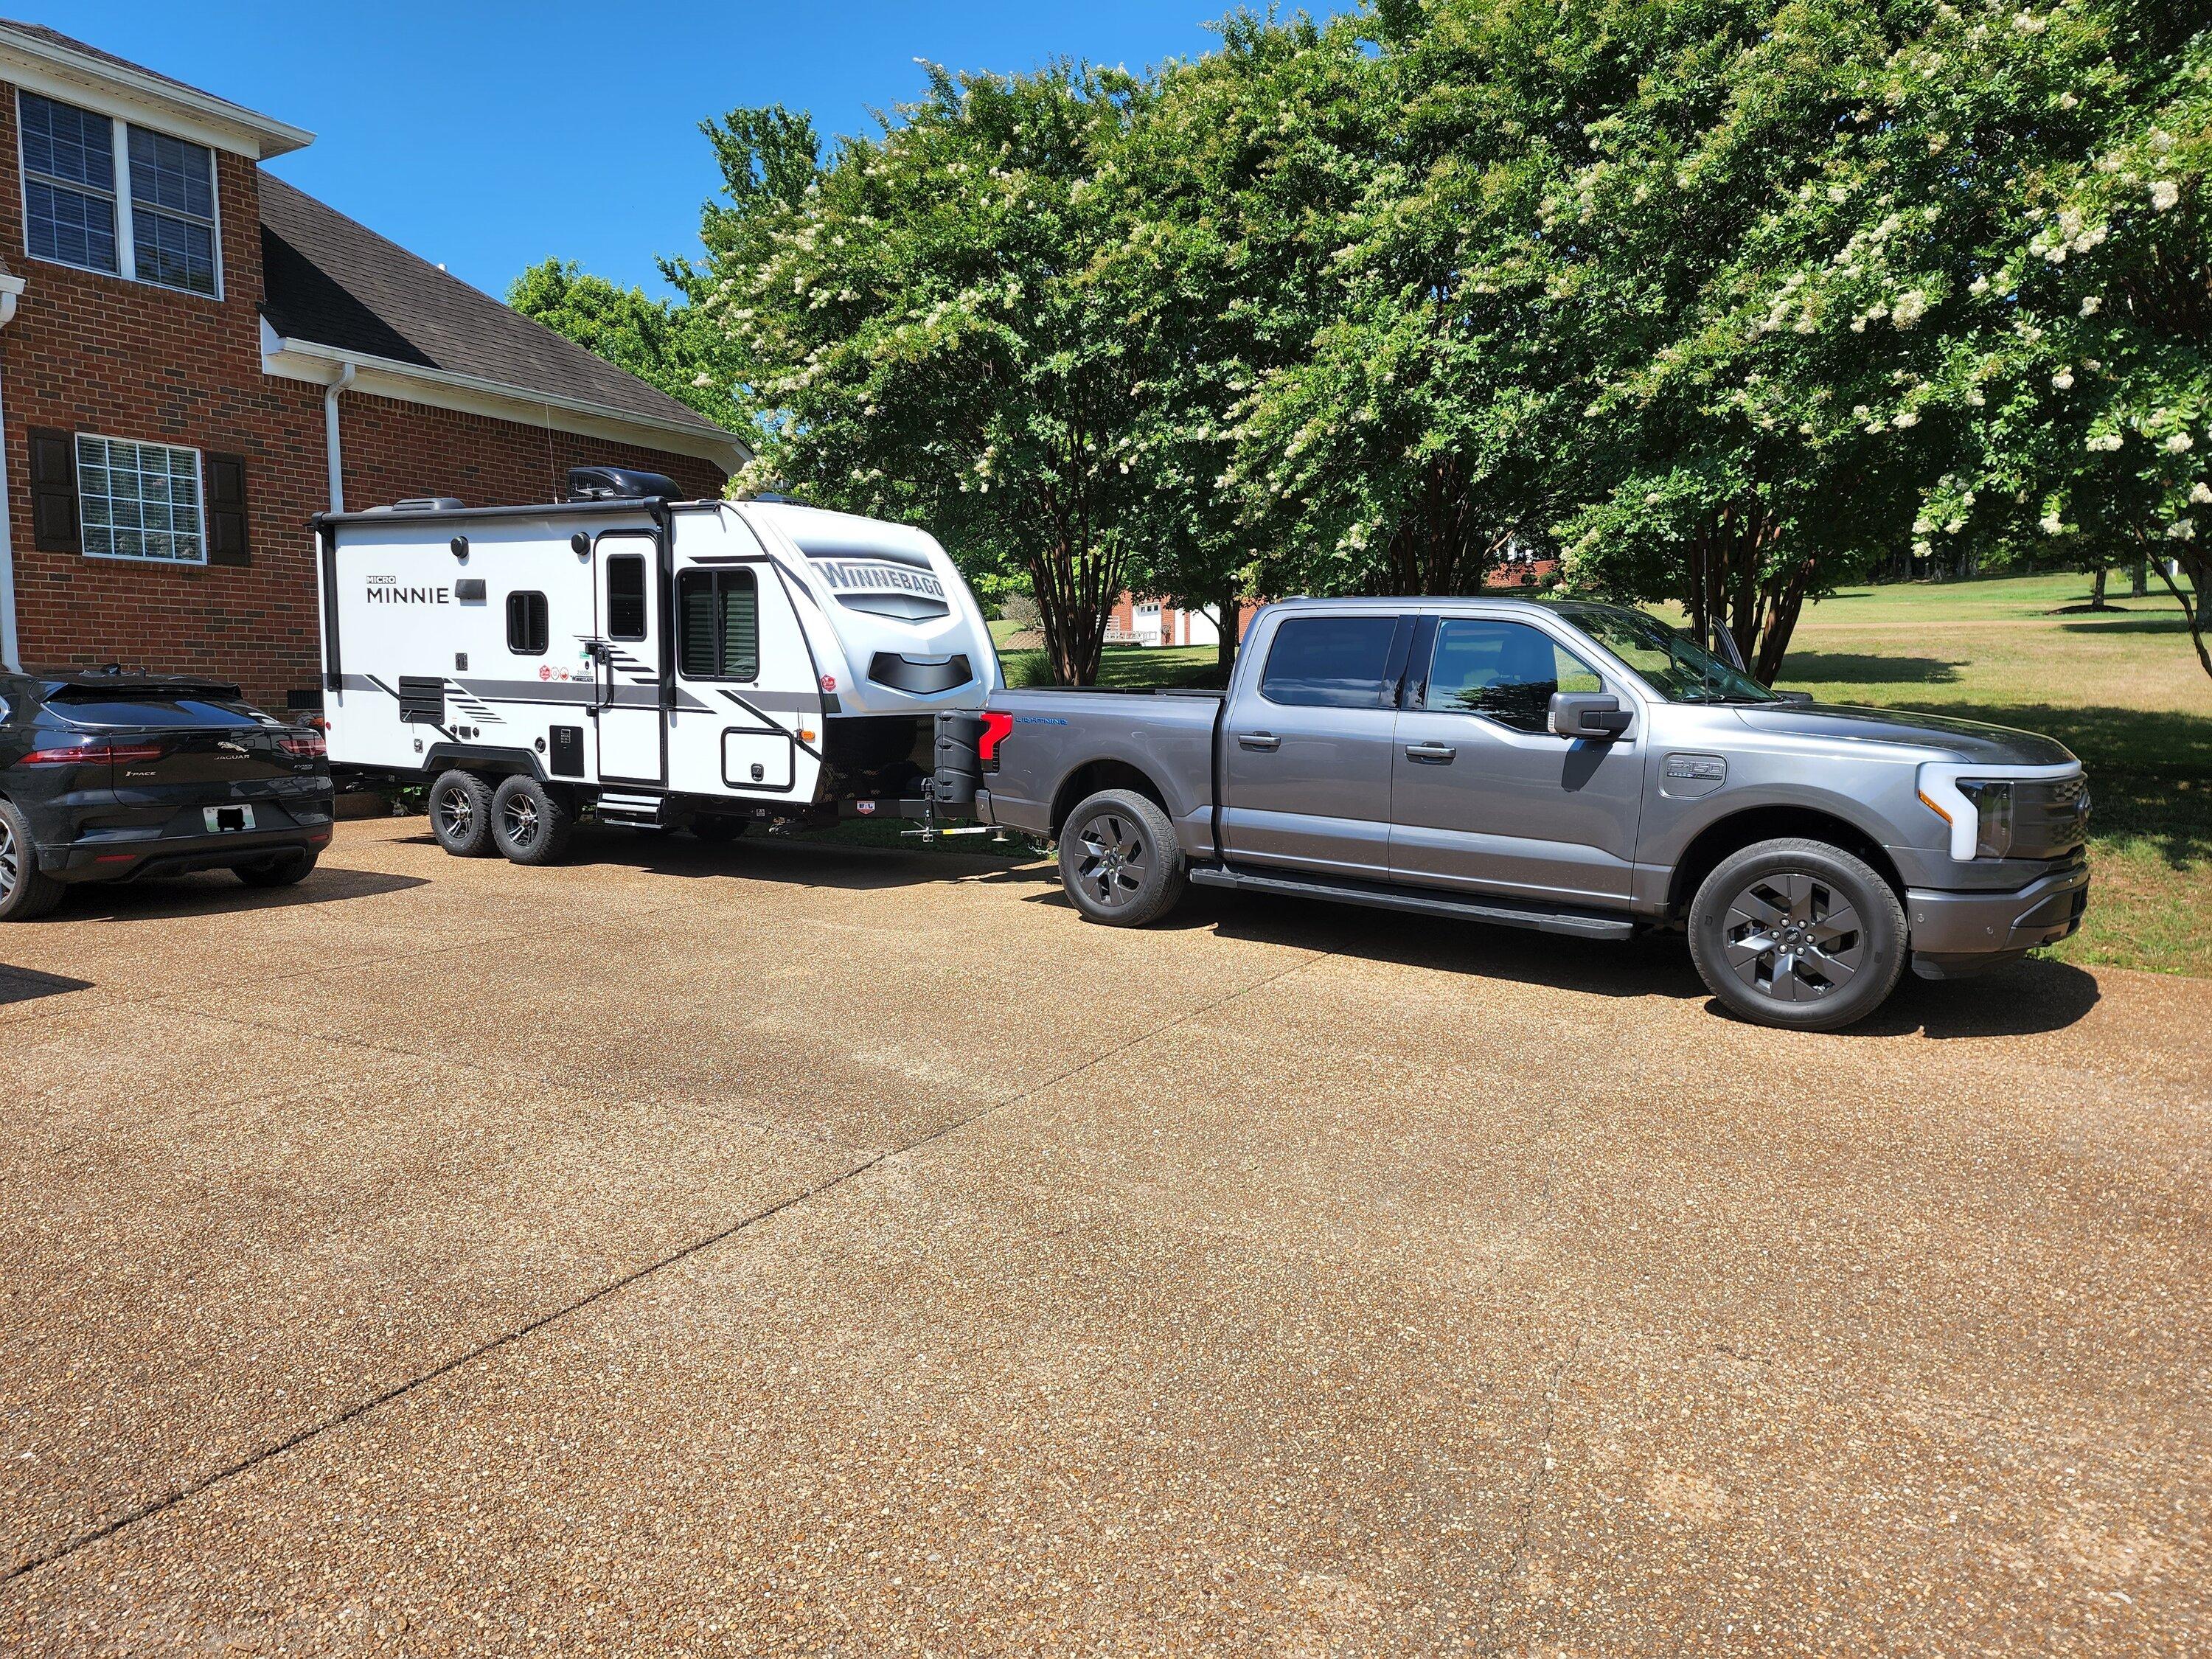 Ford F-150 Lightning First test ride towing our travel trailer (1.0 mi/kWh on 40-70 MPH loop) 20220710_103009